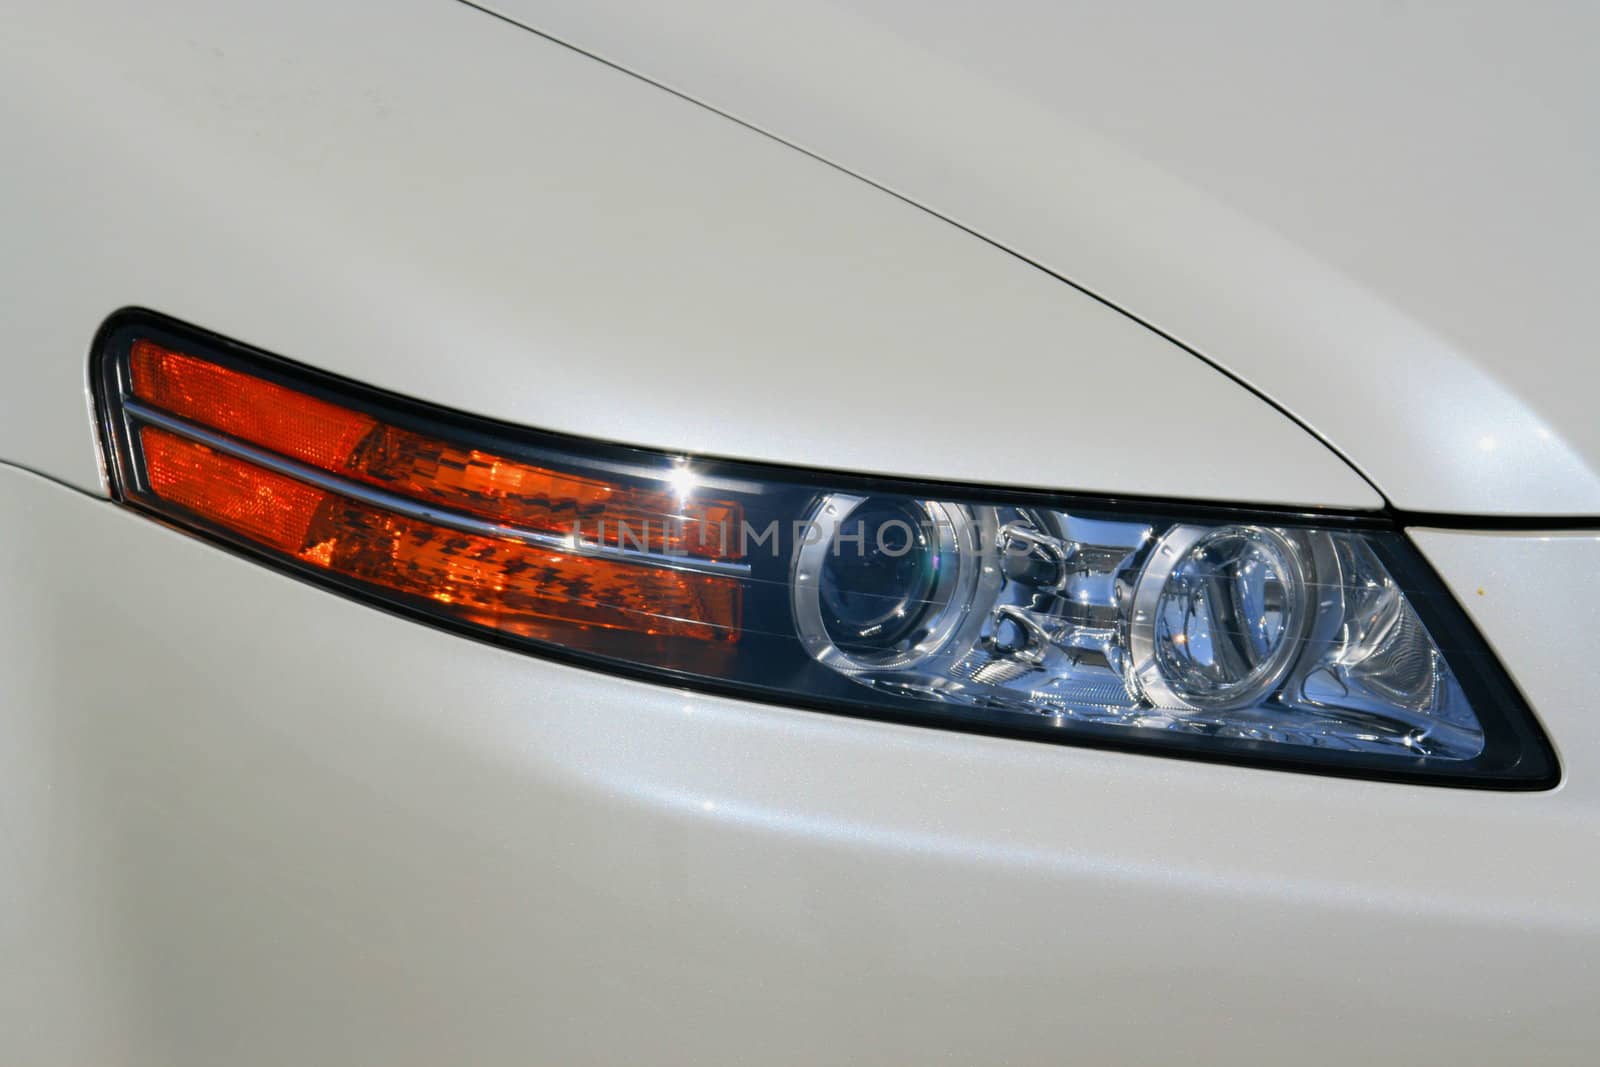 Close up of the headlights of a sports car.
